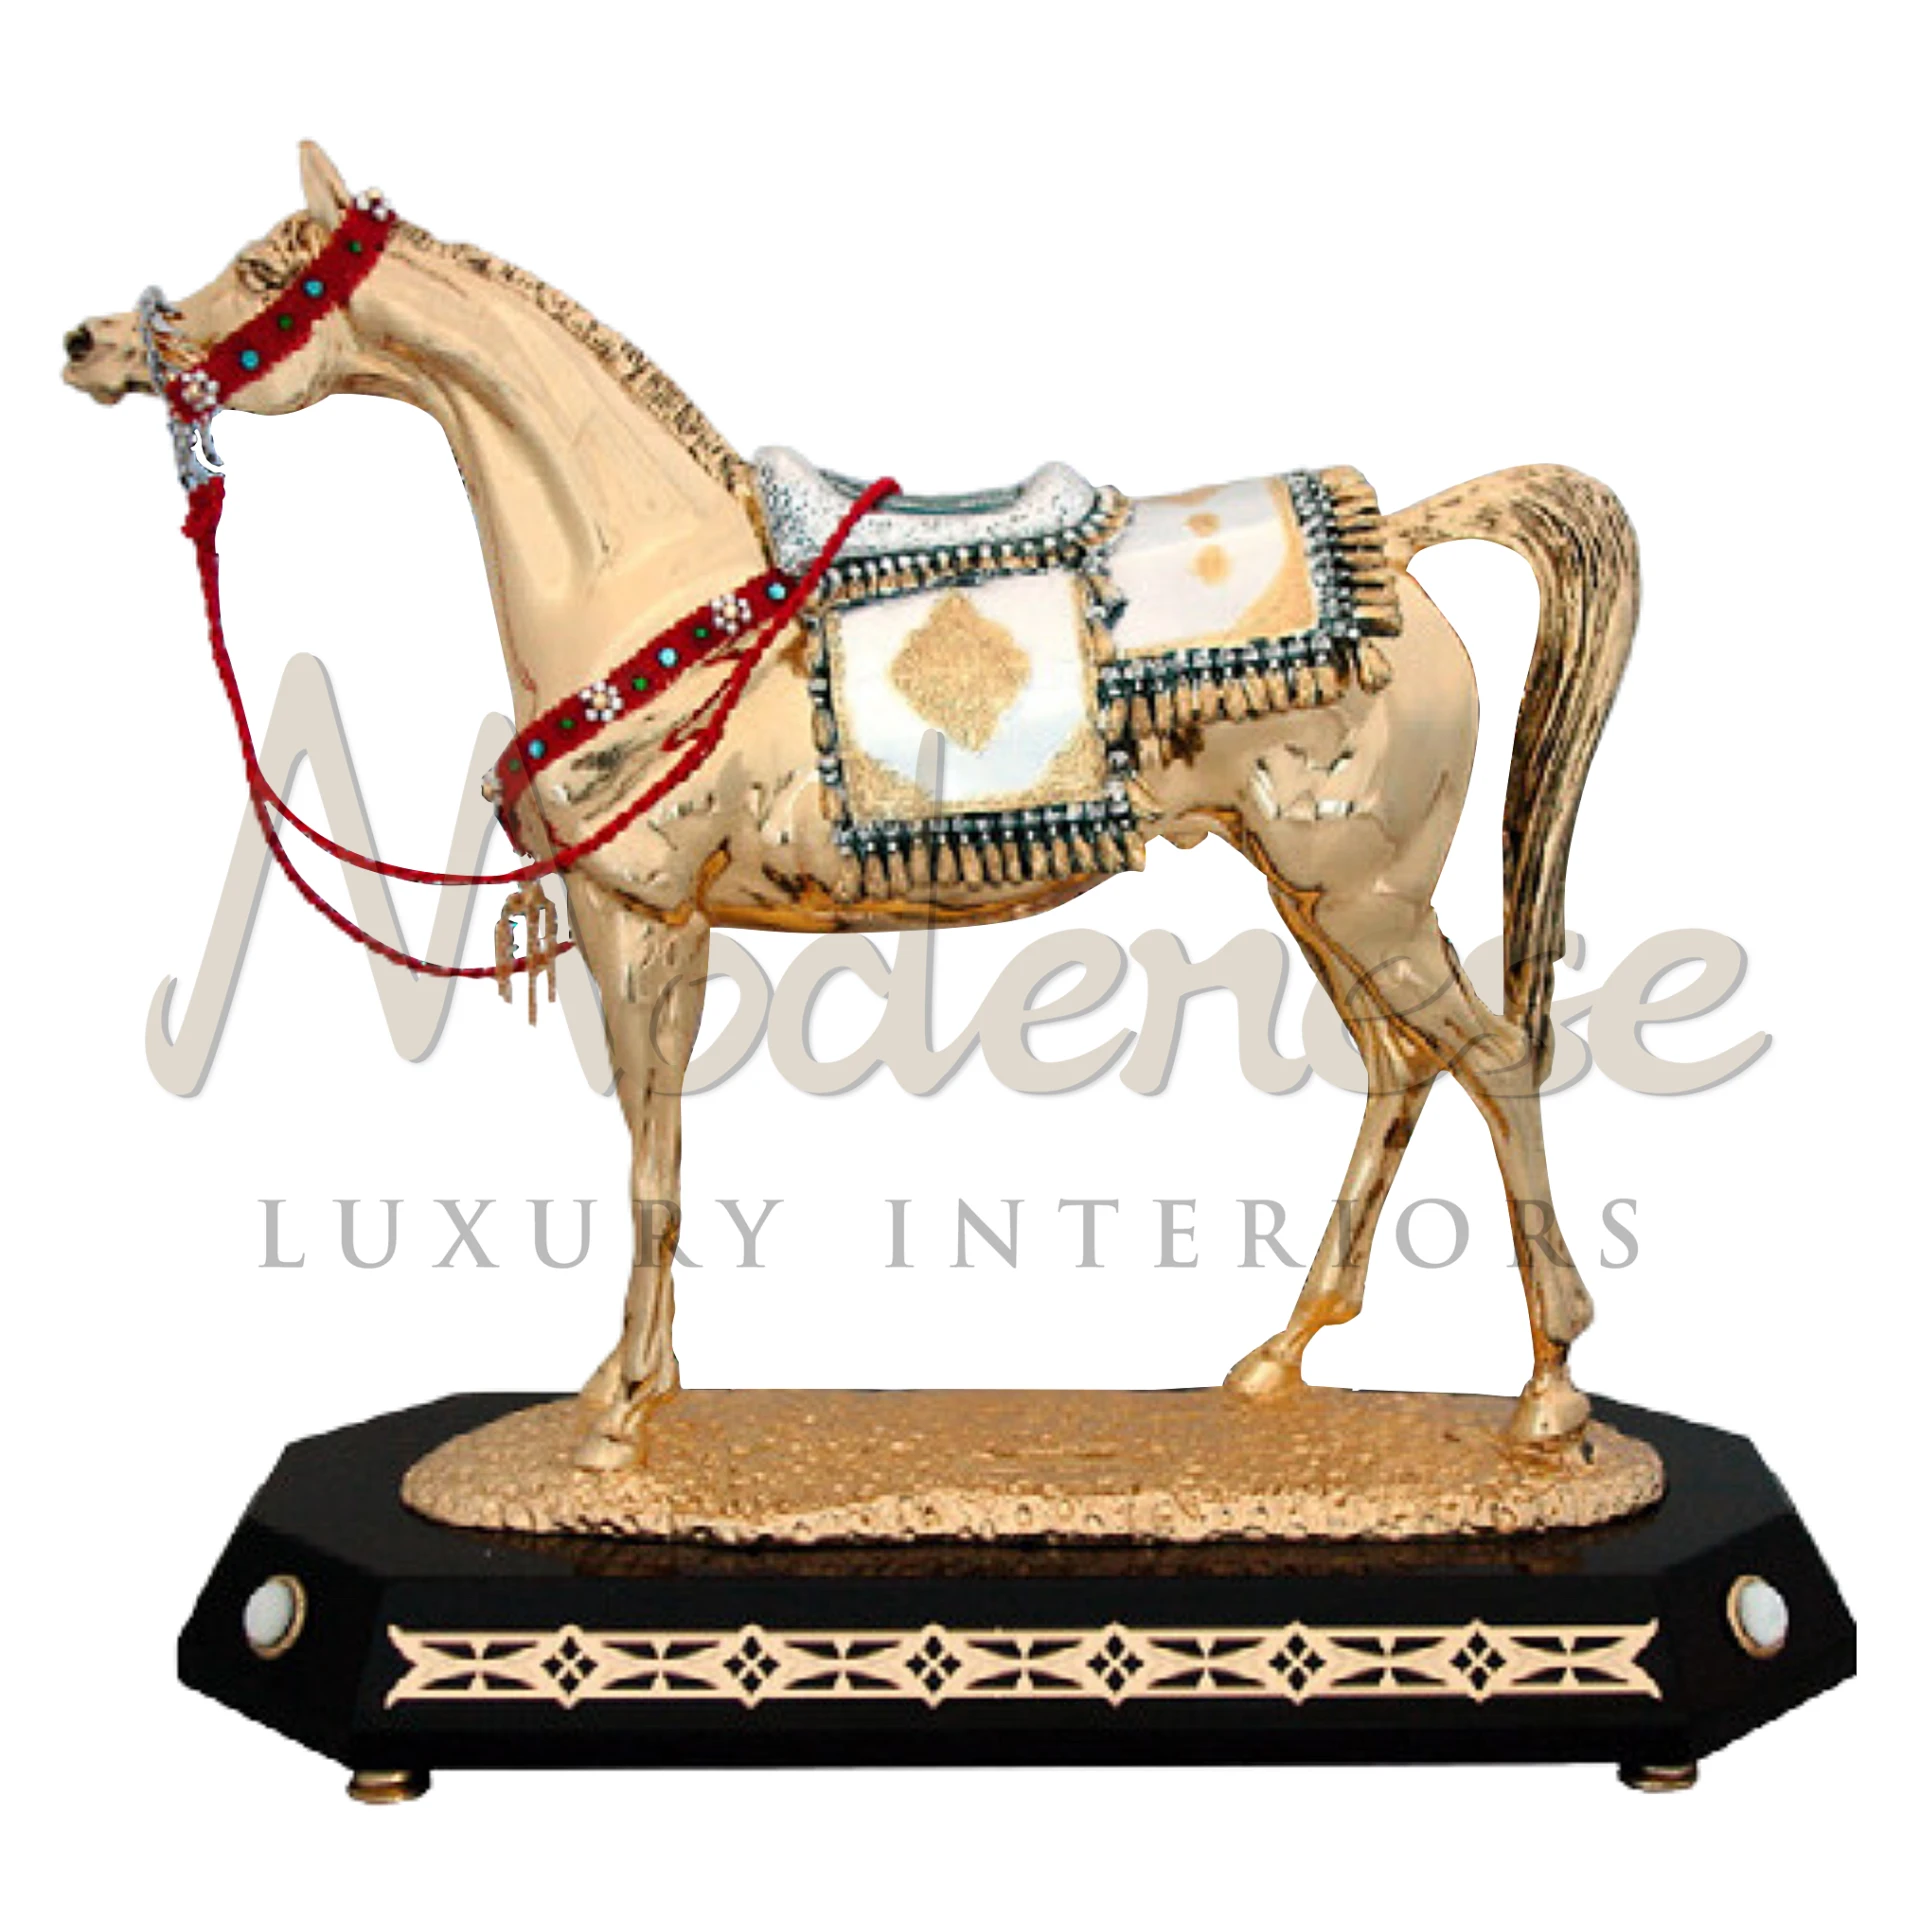 Stylish Horse statuette in sleek, modern design, crafted from materials like metal or ceramic, ideal for contemporary luxury interior and home décor.